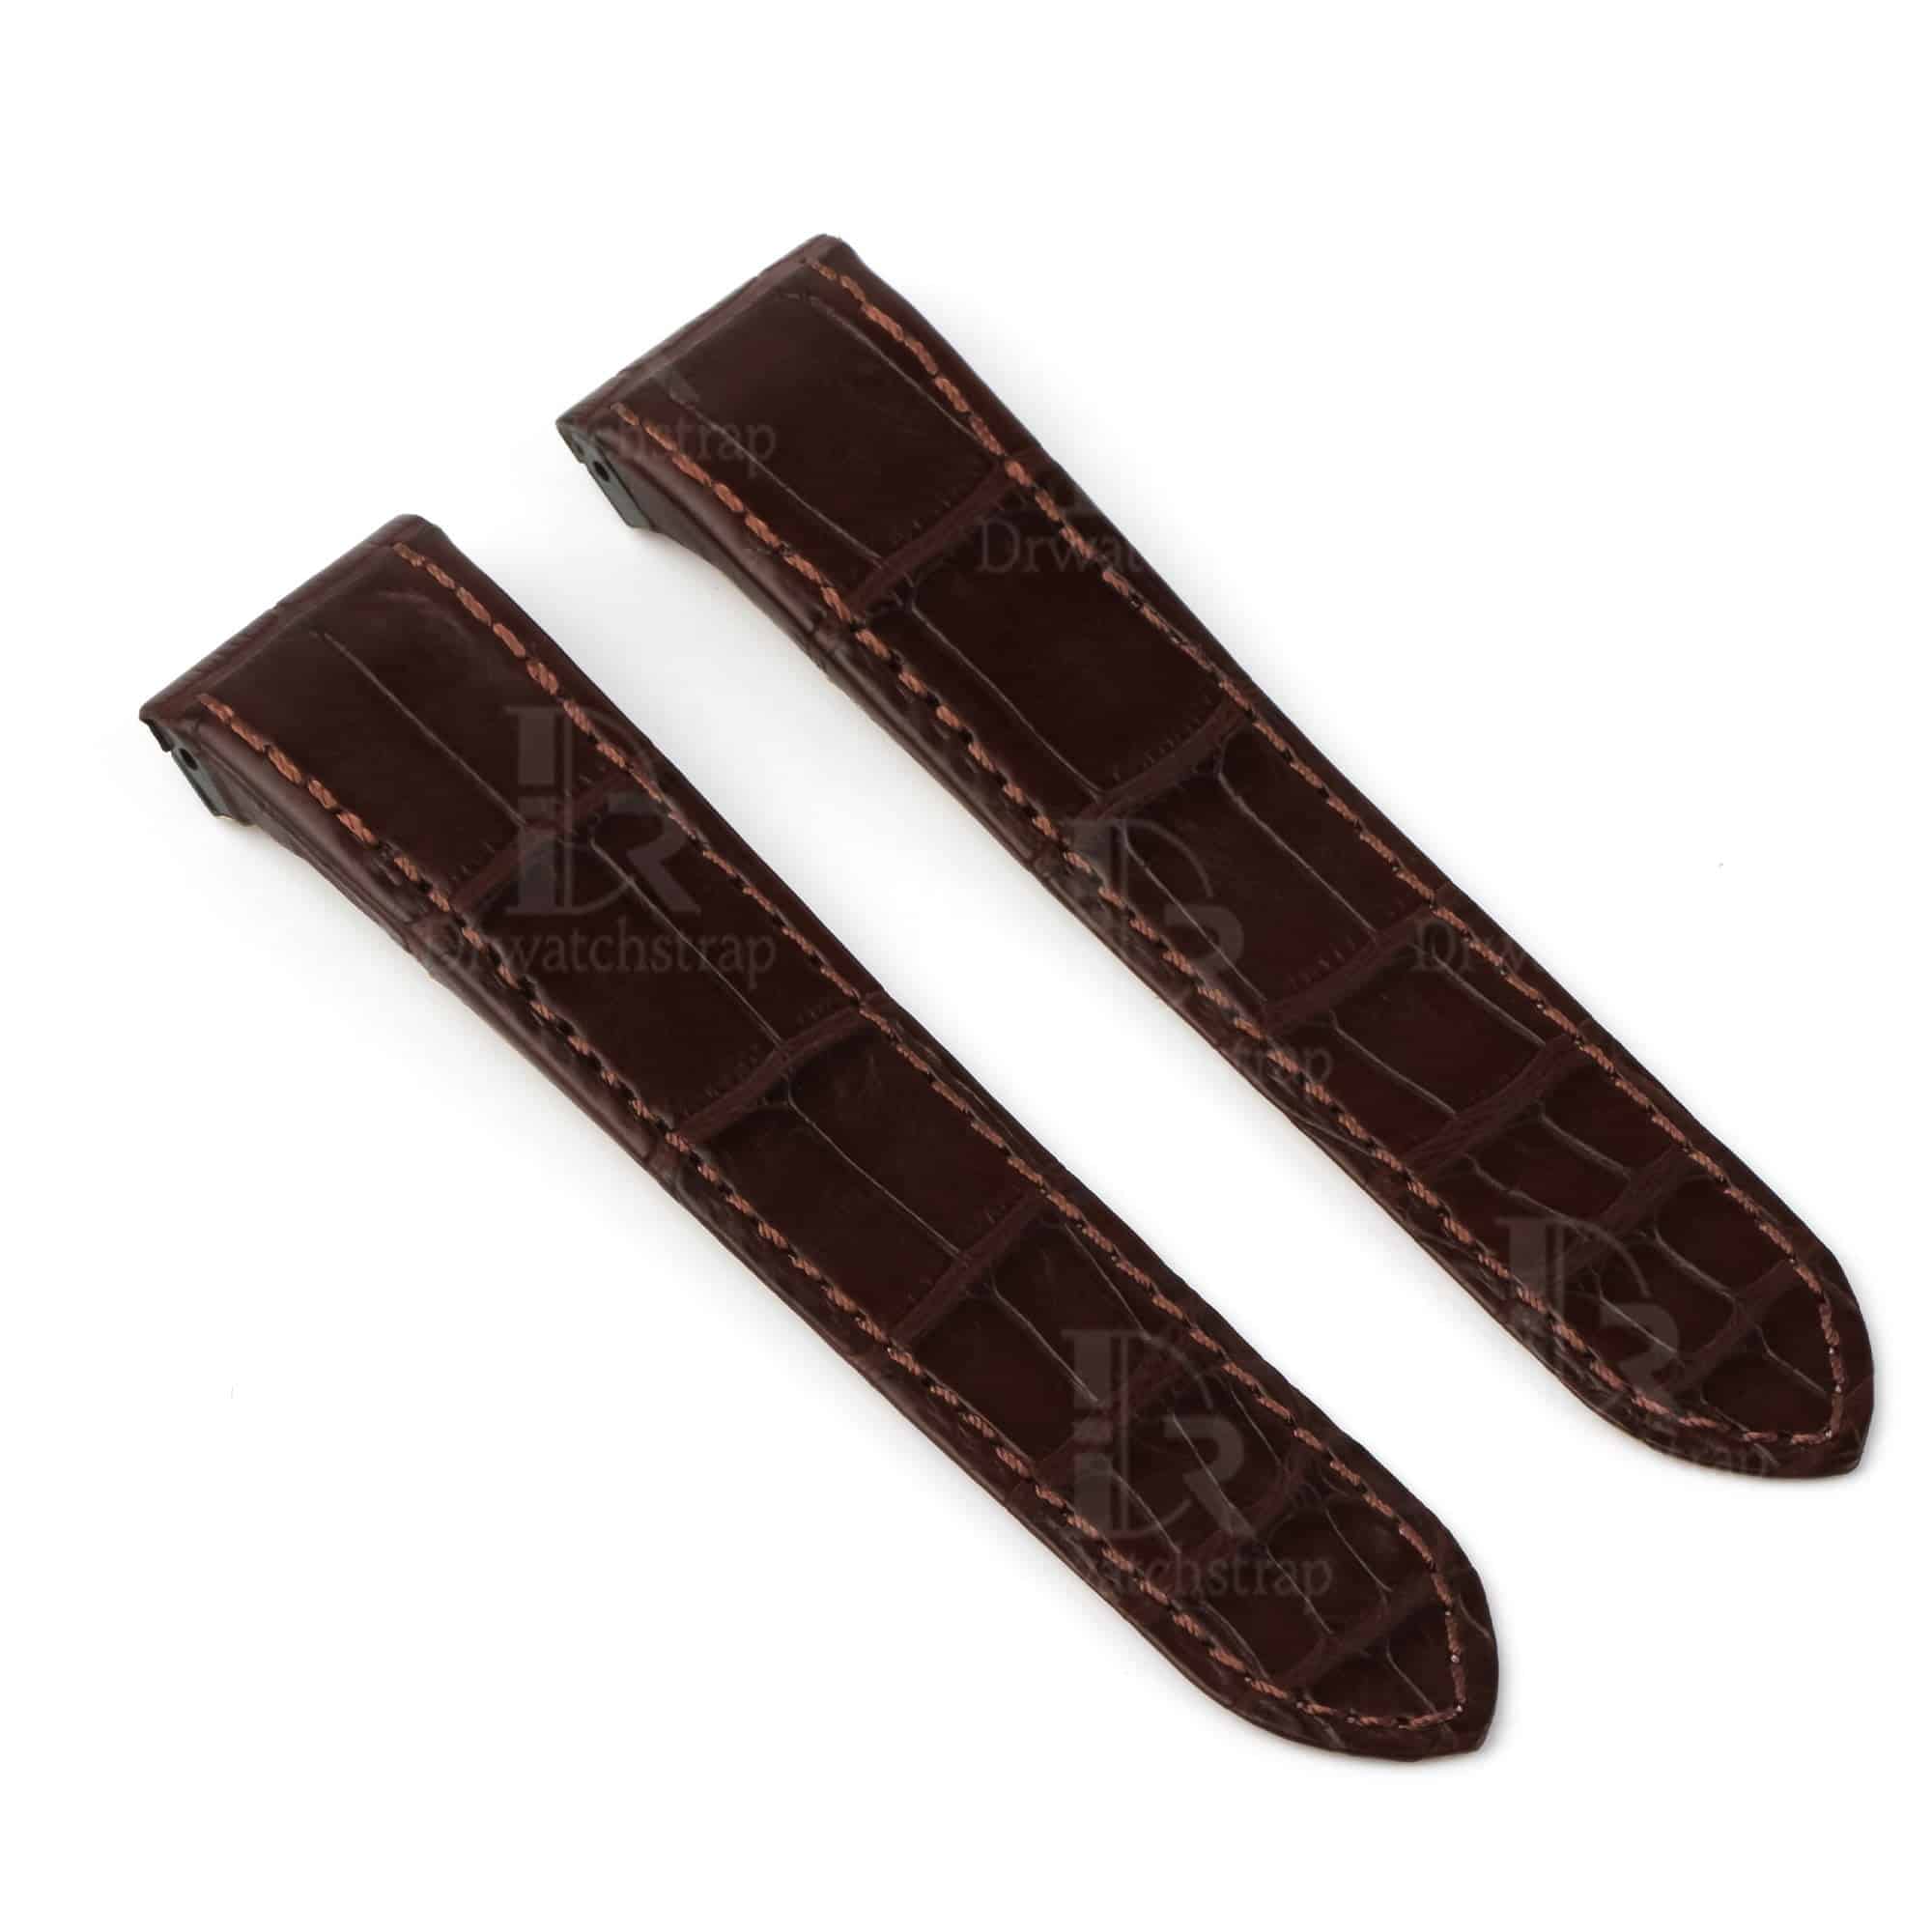 Custom handmade best quality replacement Brown America Alligator Leather Cartier Santos 100 watch straps and watch bands Cartier Santos 100 Midsize Large Chronograph XL size watches - OEM aftermarket high-end leather watchbands online at a low price